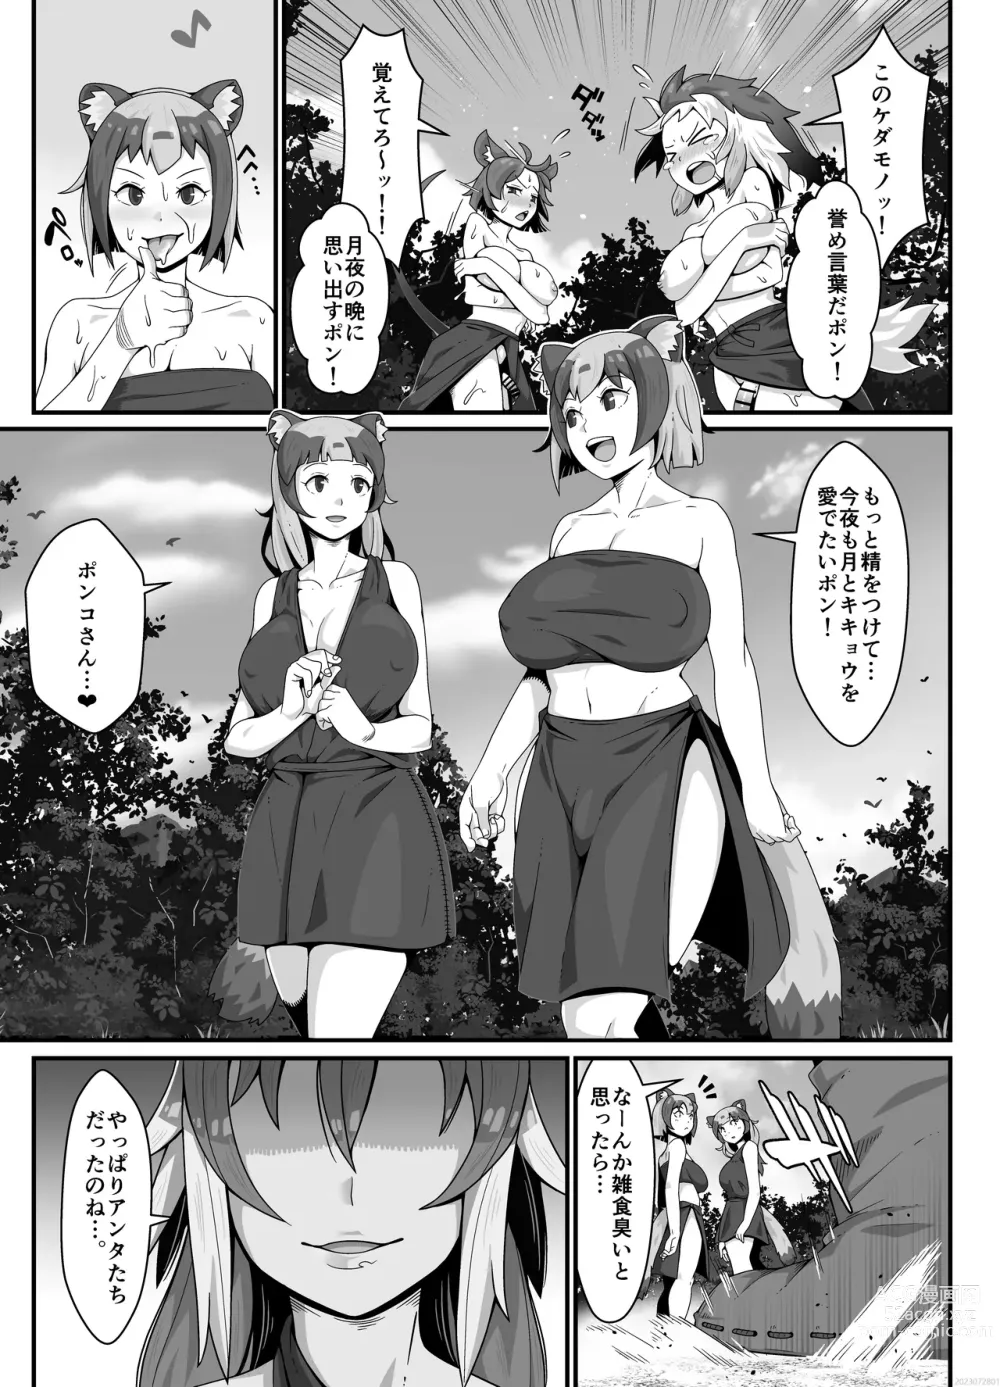 Page 3 of doujinshi FUTACOLO CO SIDE STORIES GENEALOGY OF MANKIND